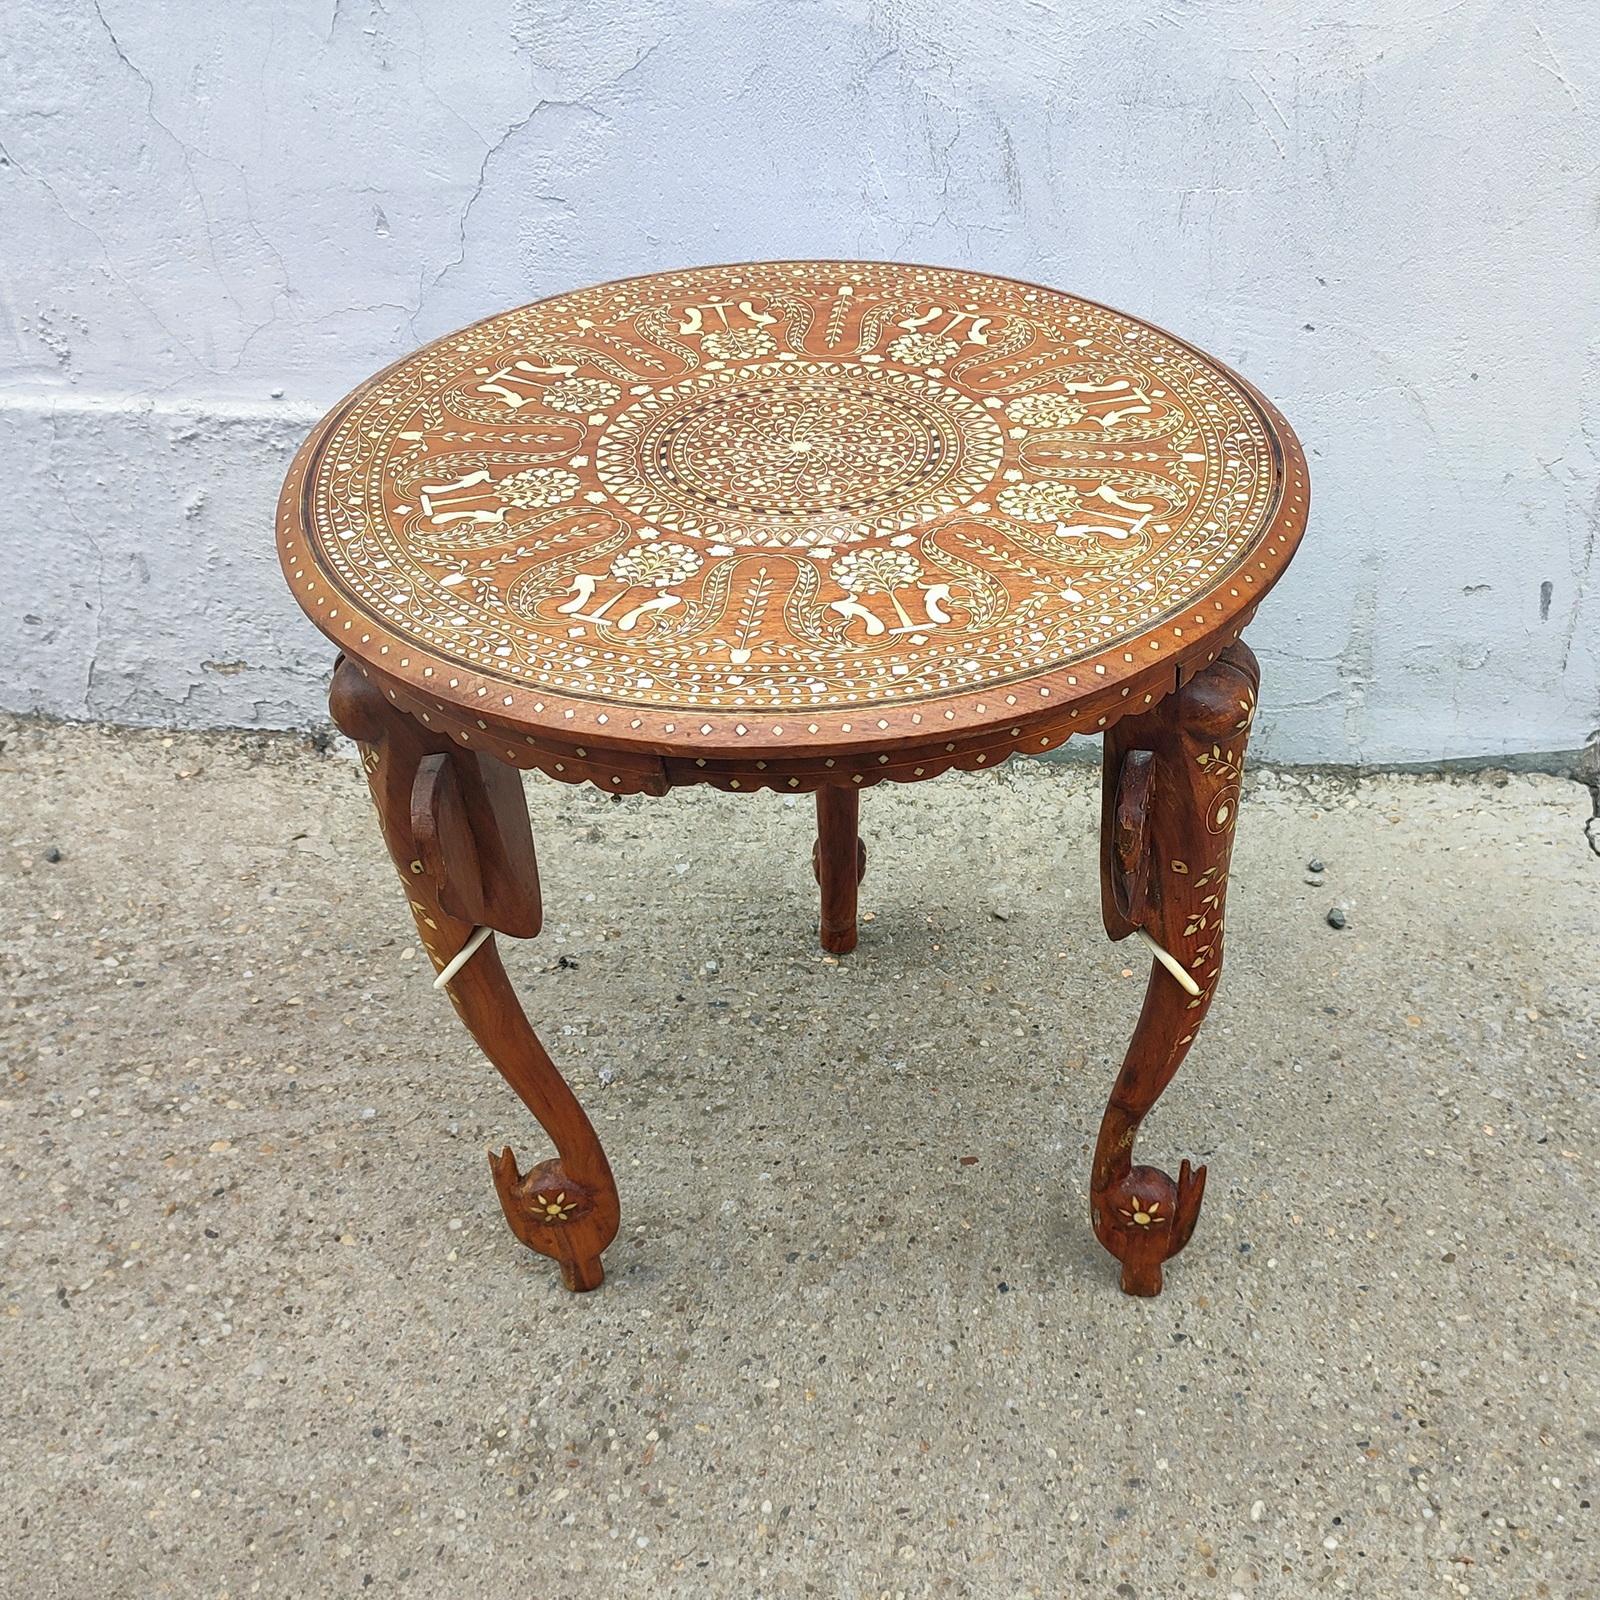 Anglo-Indian Anglo Indian Carved Wood and Inlaid Round Table with Elephants  For Sale